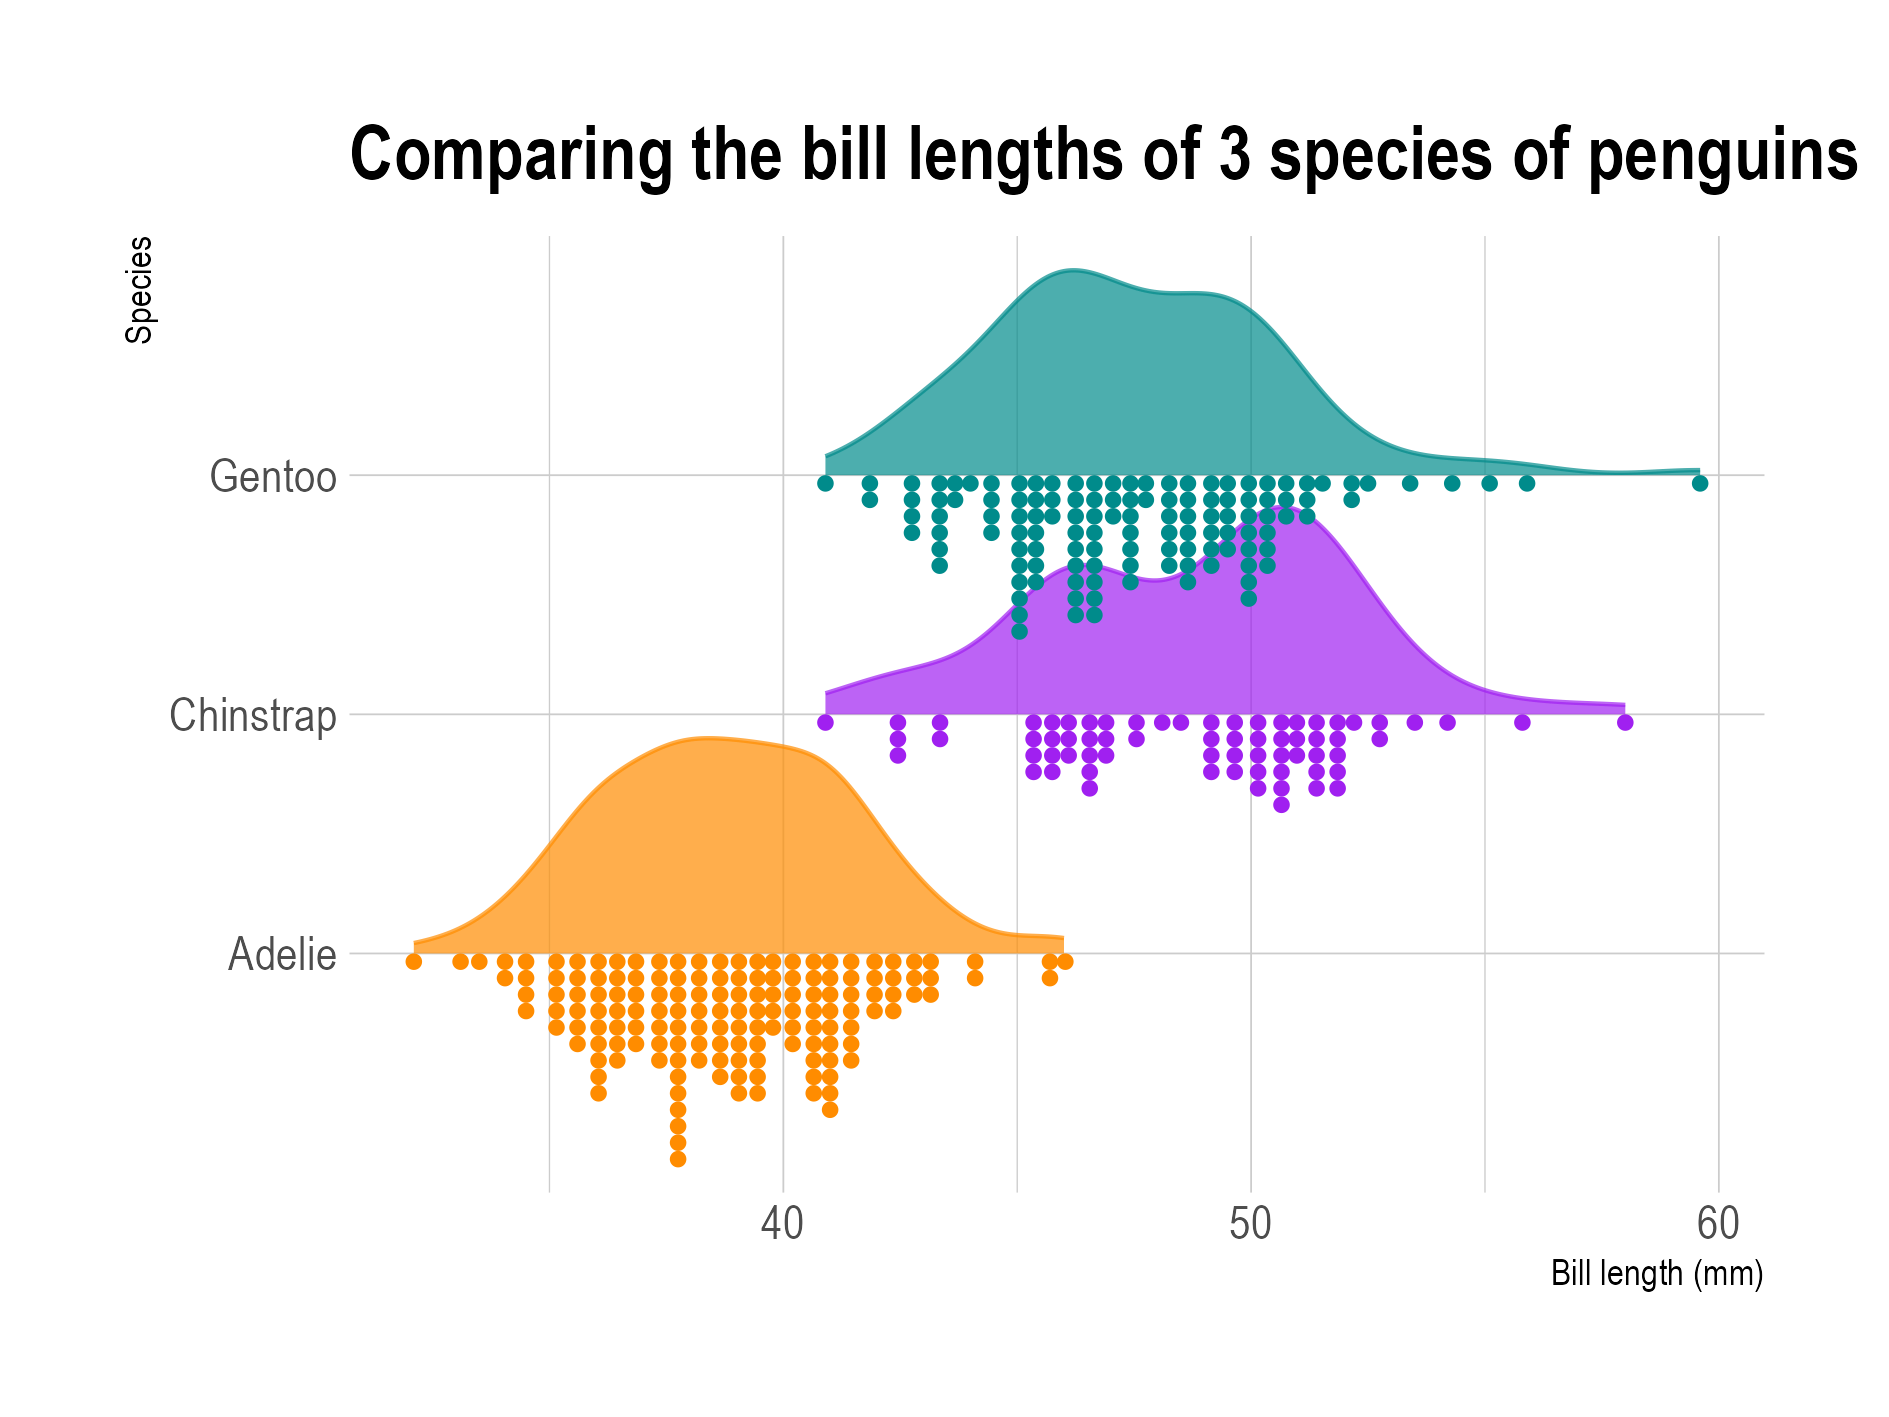 3 raincloud plots showing the distribution of the bill lengths of the 3 species of penguin